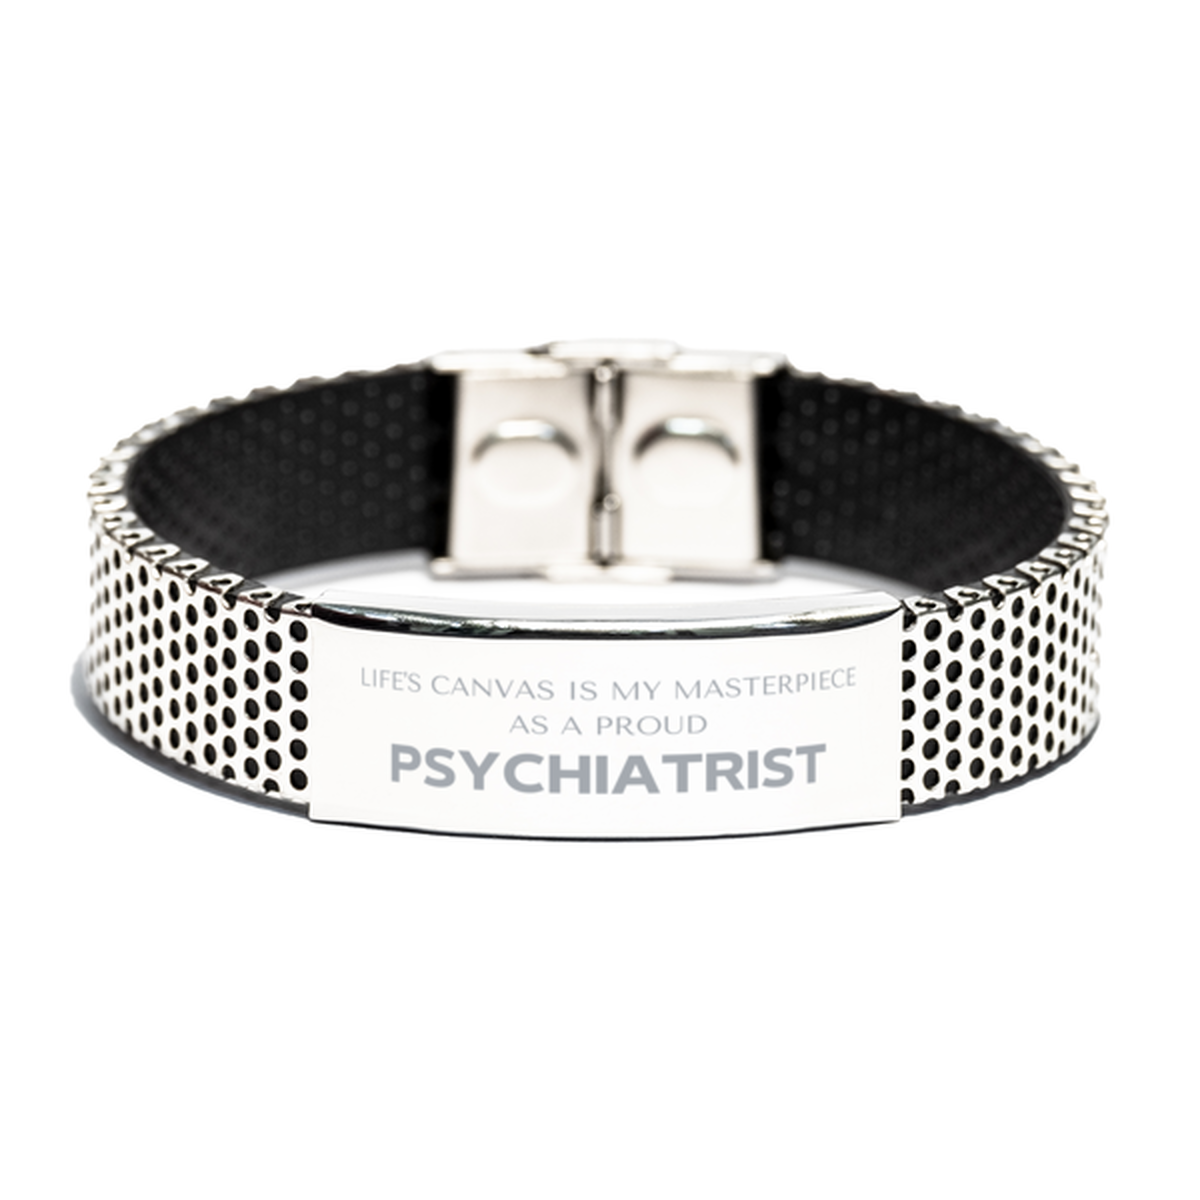 Proud Psychiatrist Gifts, Life's canvas is my masterpiece, Epic Birthday Christmas Unique Stainless Steel Bracelet For Psychiatrist, Coworkers, Men, Women, Friends